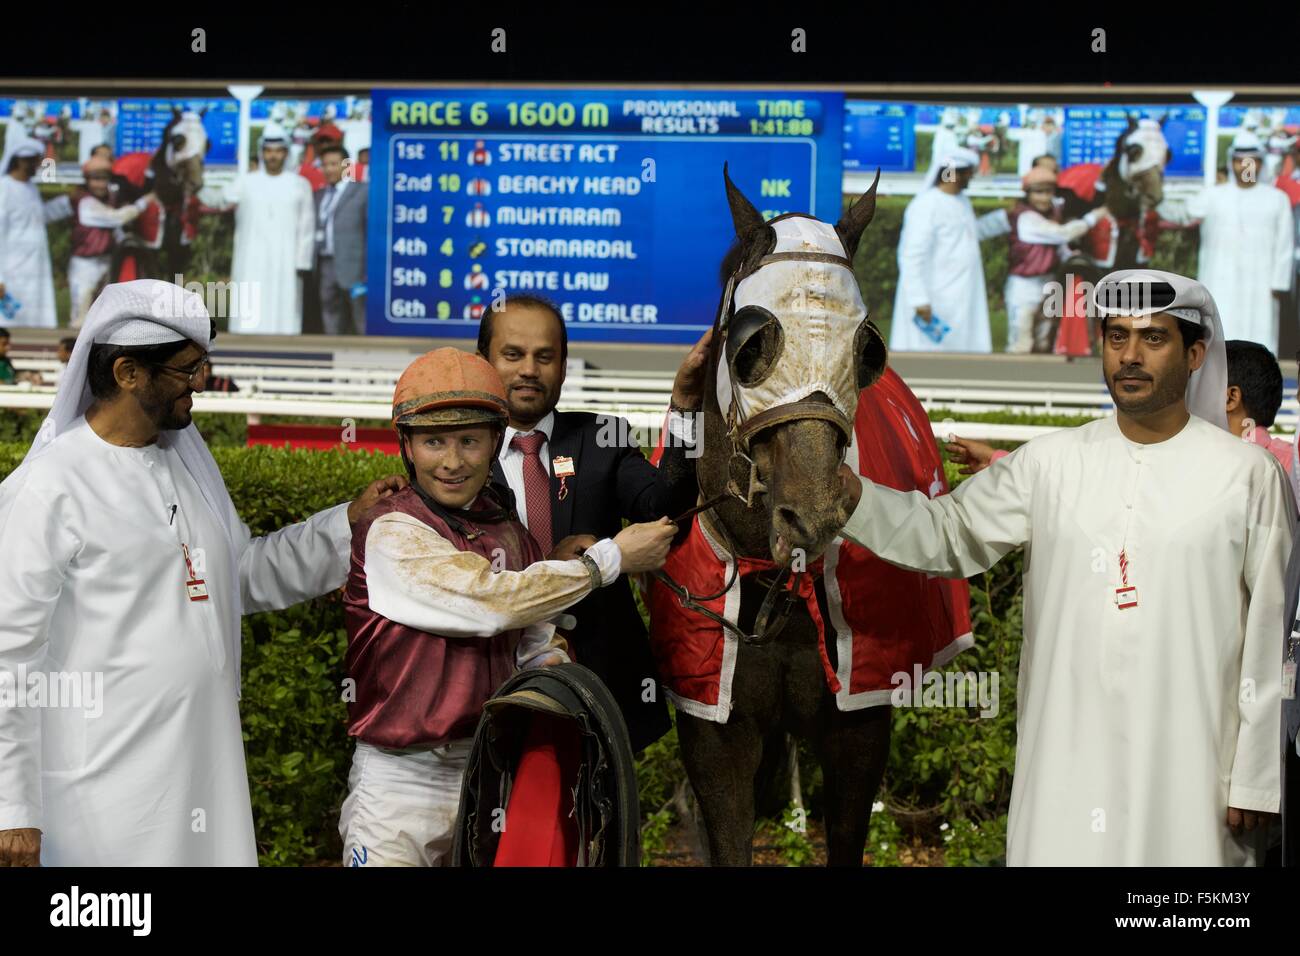 Meydan racecourse, UAE. 5th November, 2015.   His Excellency Sheikh Ahmed Bin Mohamed Al Maktoum and Tadhg O'Shea with Street Act after race 6 the Thoroughbreds Handicap 74-89 at Meydan Credit:  Tom Morgan/Alamy Live News Stock Photo